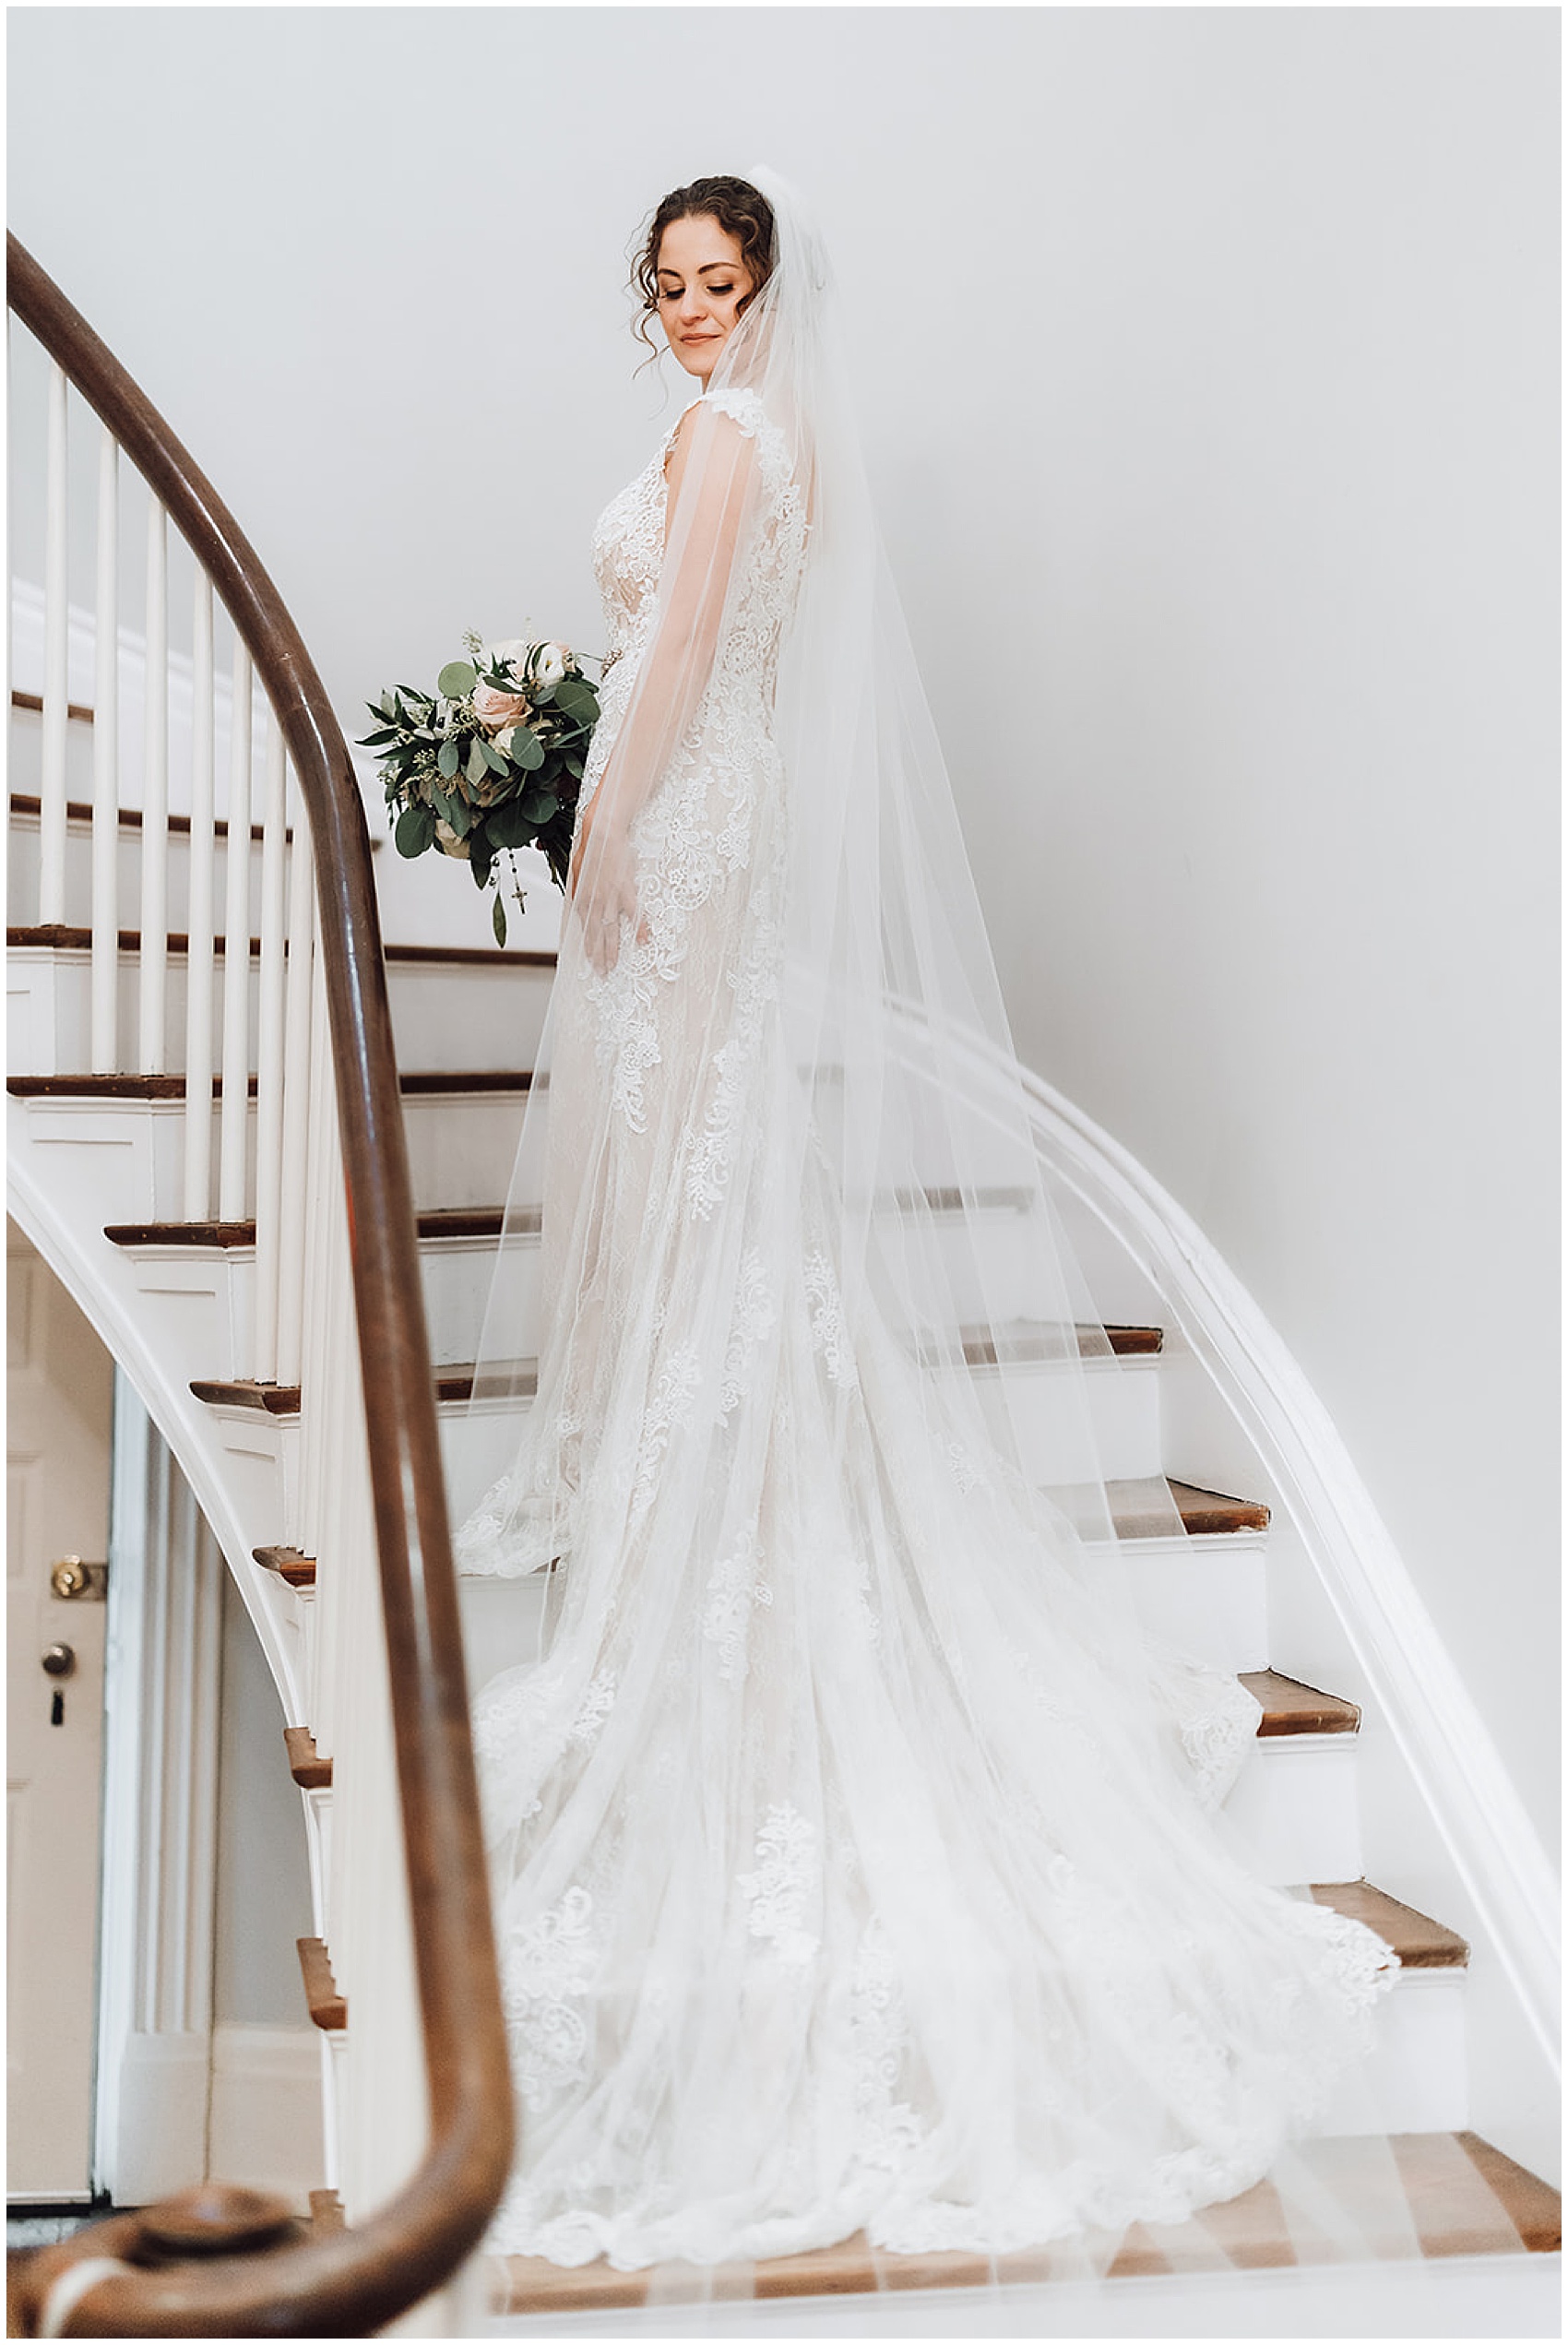 Bride will extra long train and veil stands in a stairwell with dress flowing down stairs